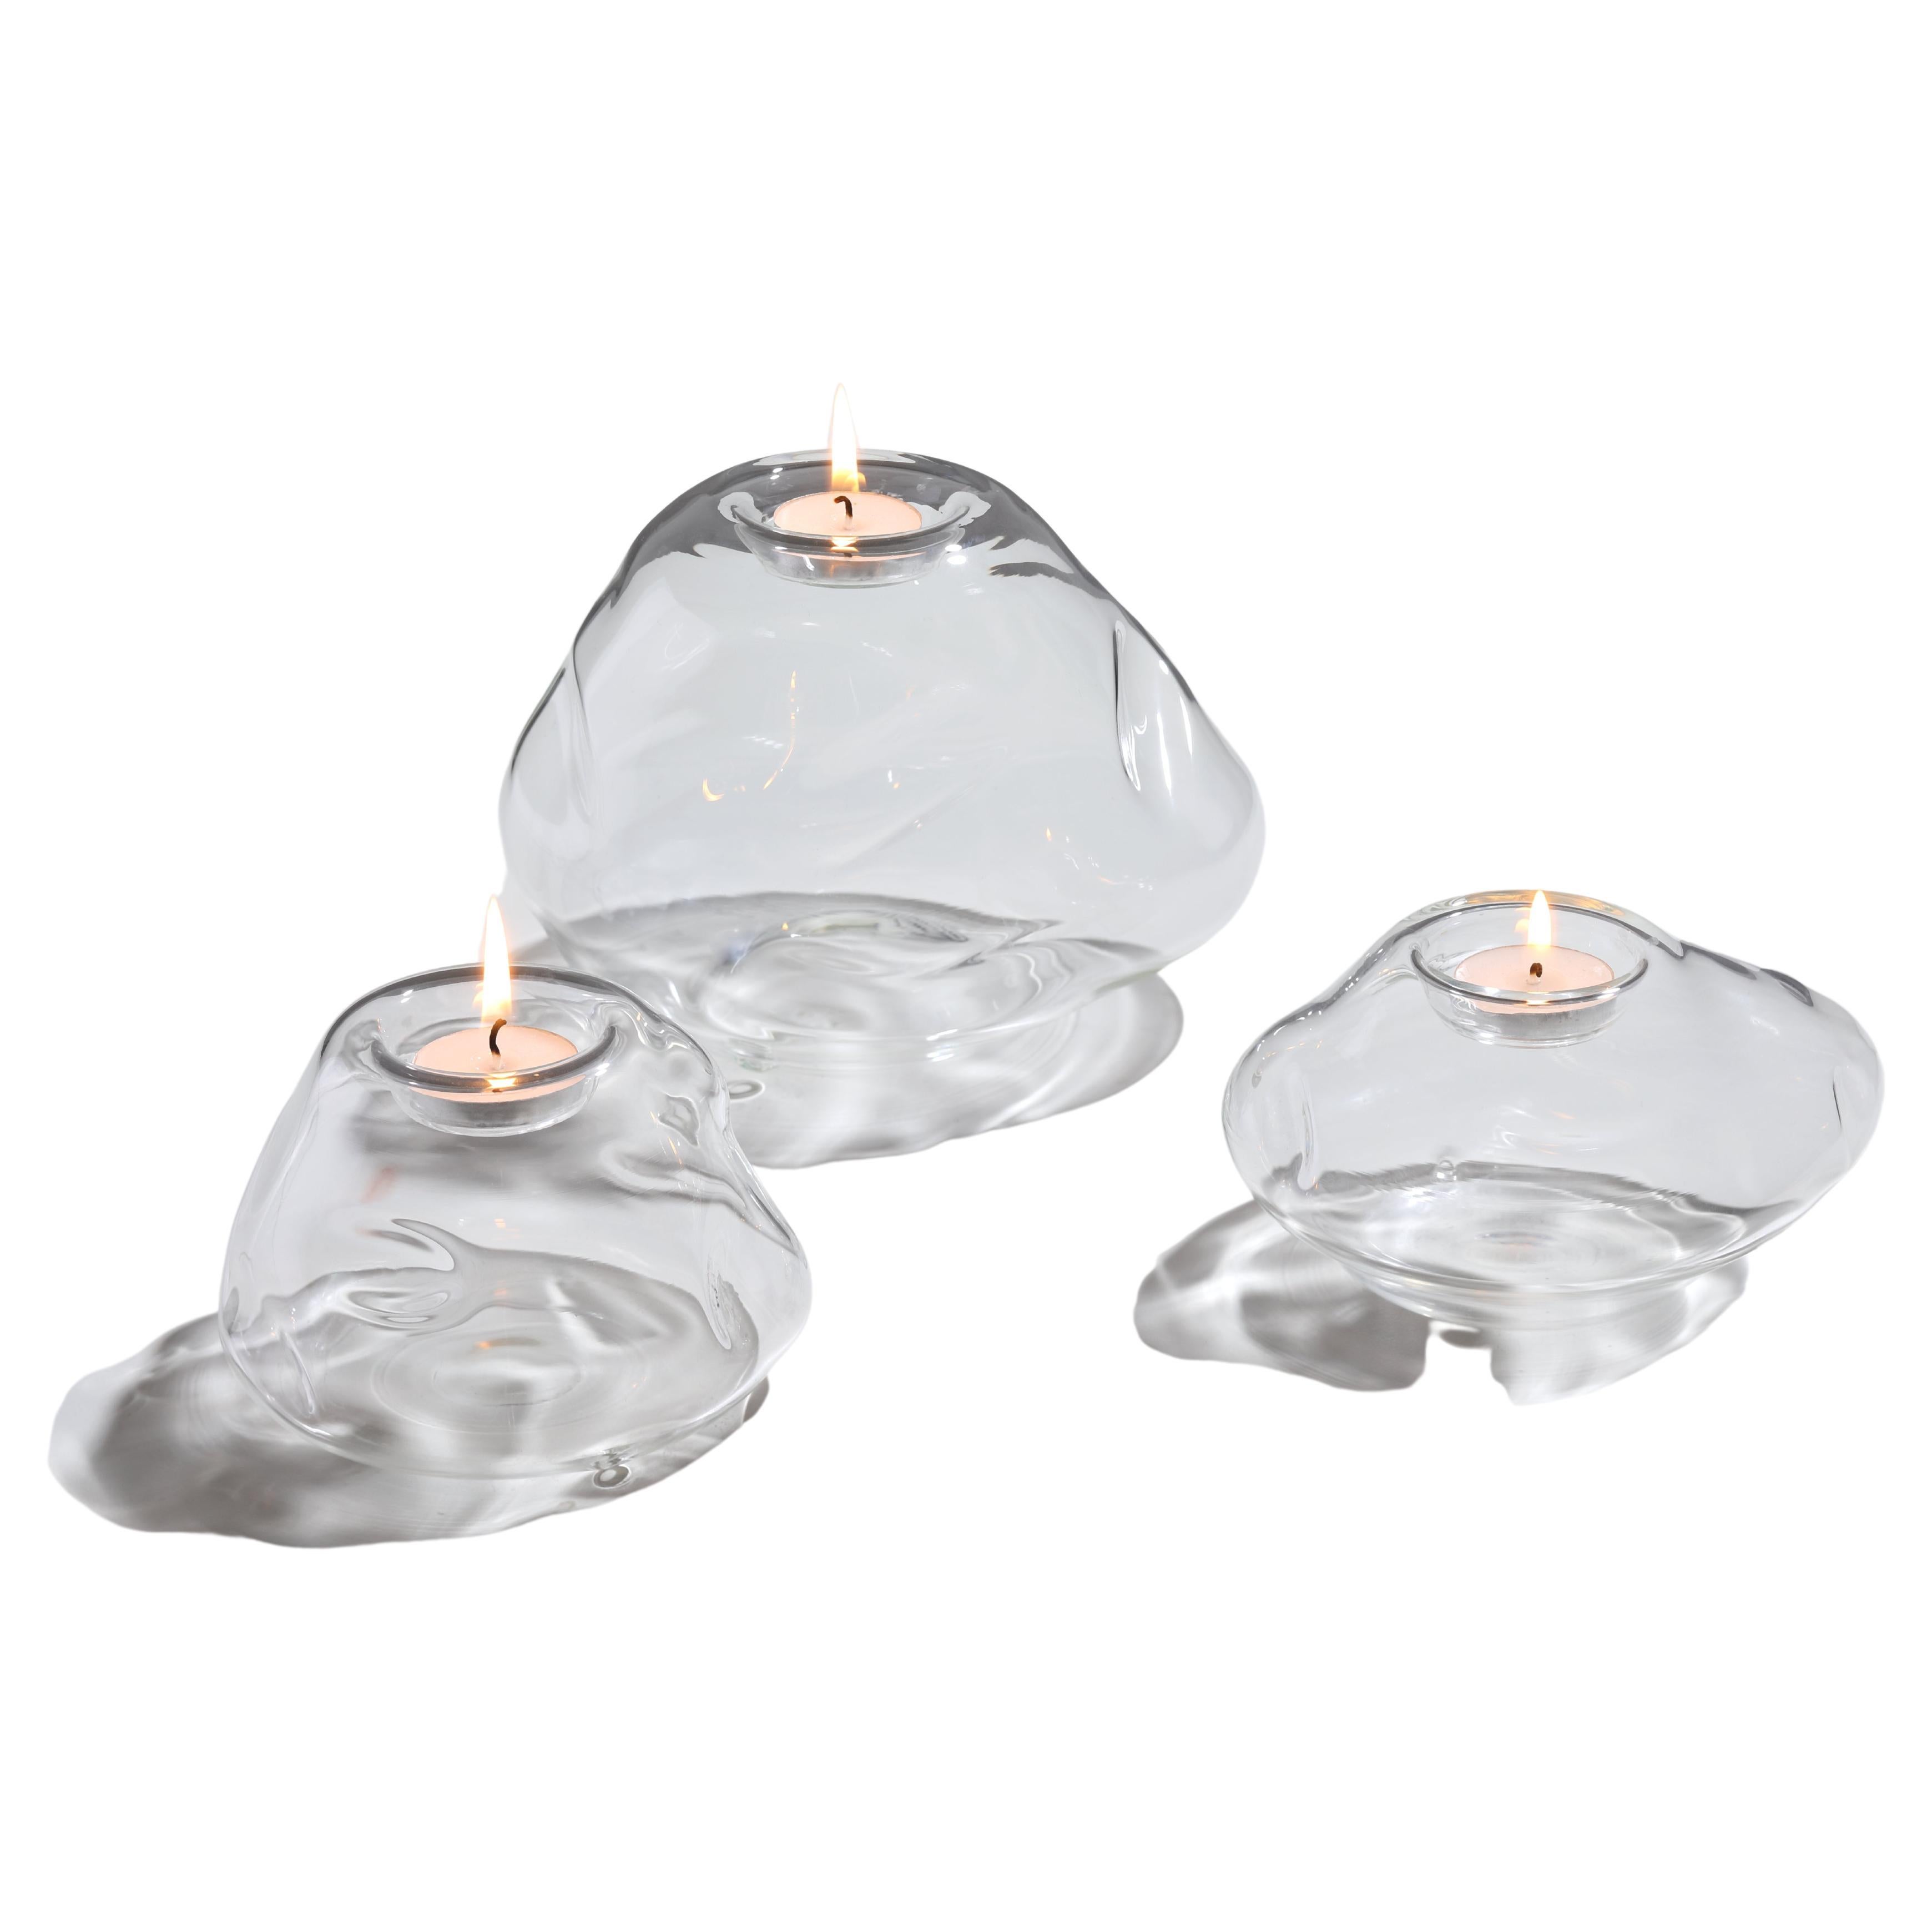 Pebble Tea Light Candle Set Of Three, Glass Candle, Hand Blown Glass Sculpture For Sale